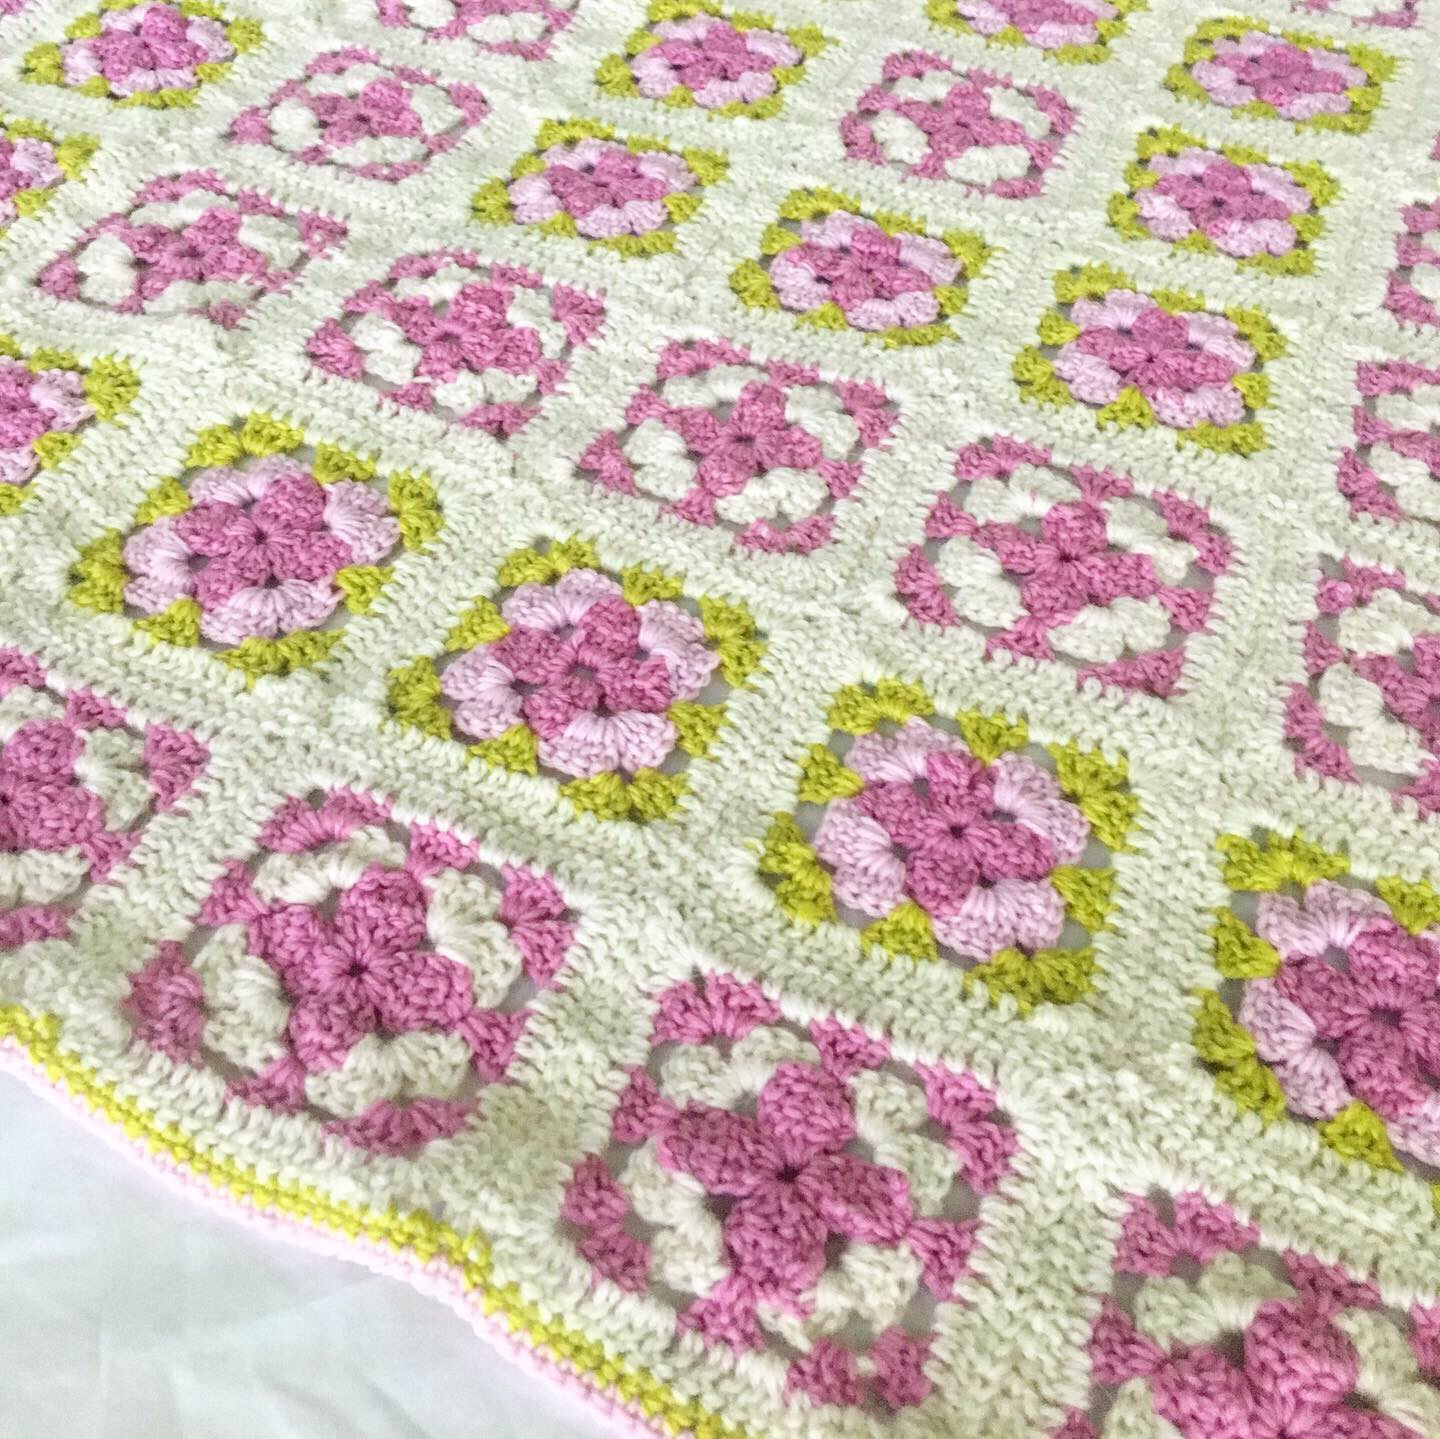 white, purple, and greeny crocheted granny square blanket